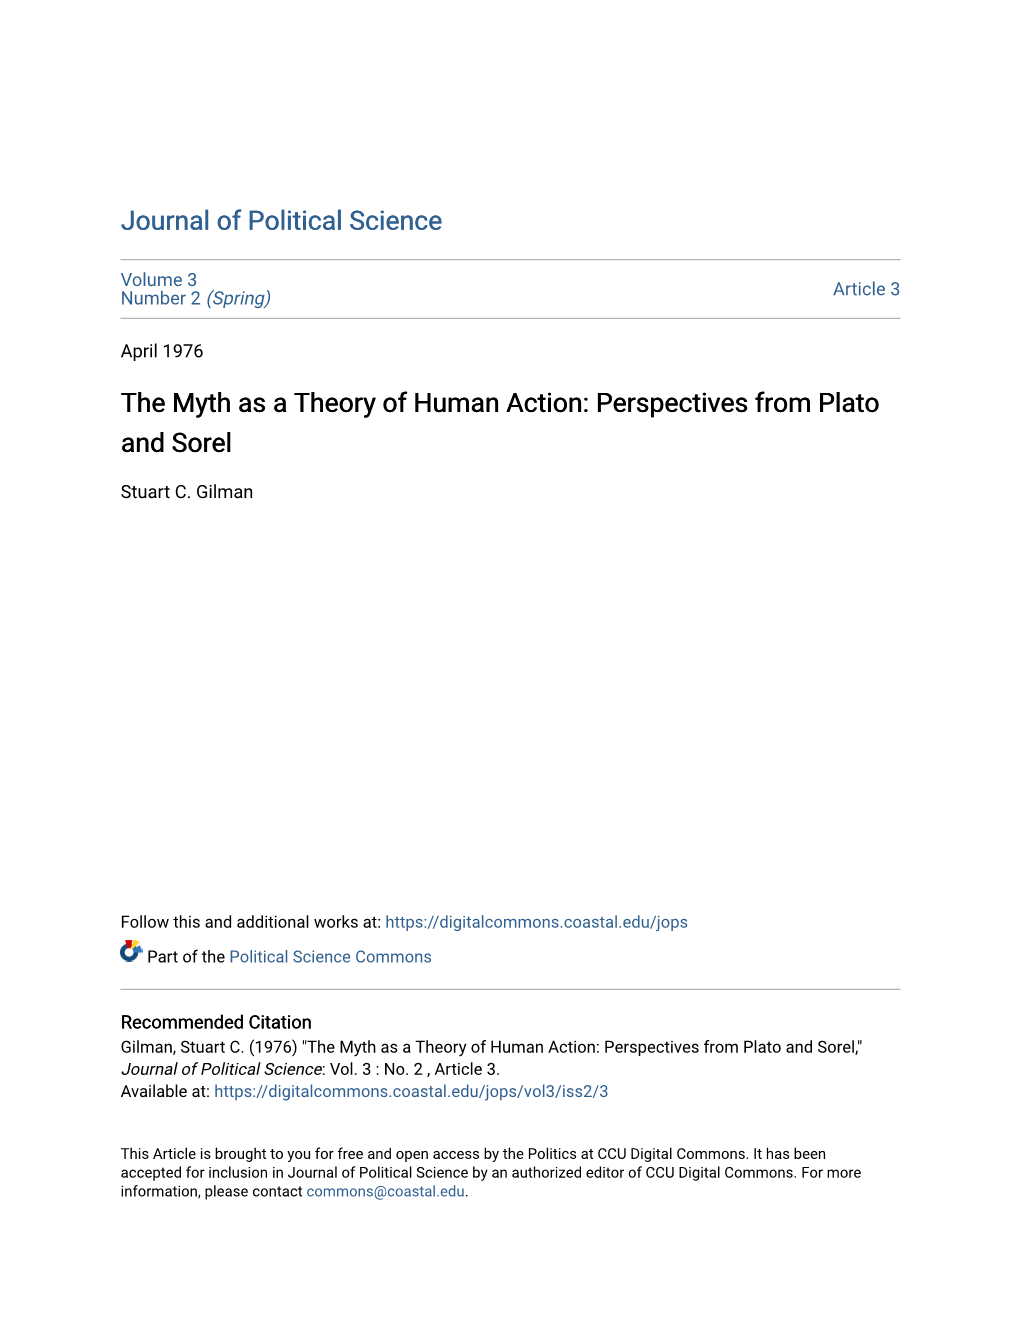 The Myth As a Theory of Human Action: Perspectives from Plato and Sorel